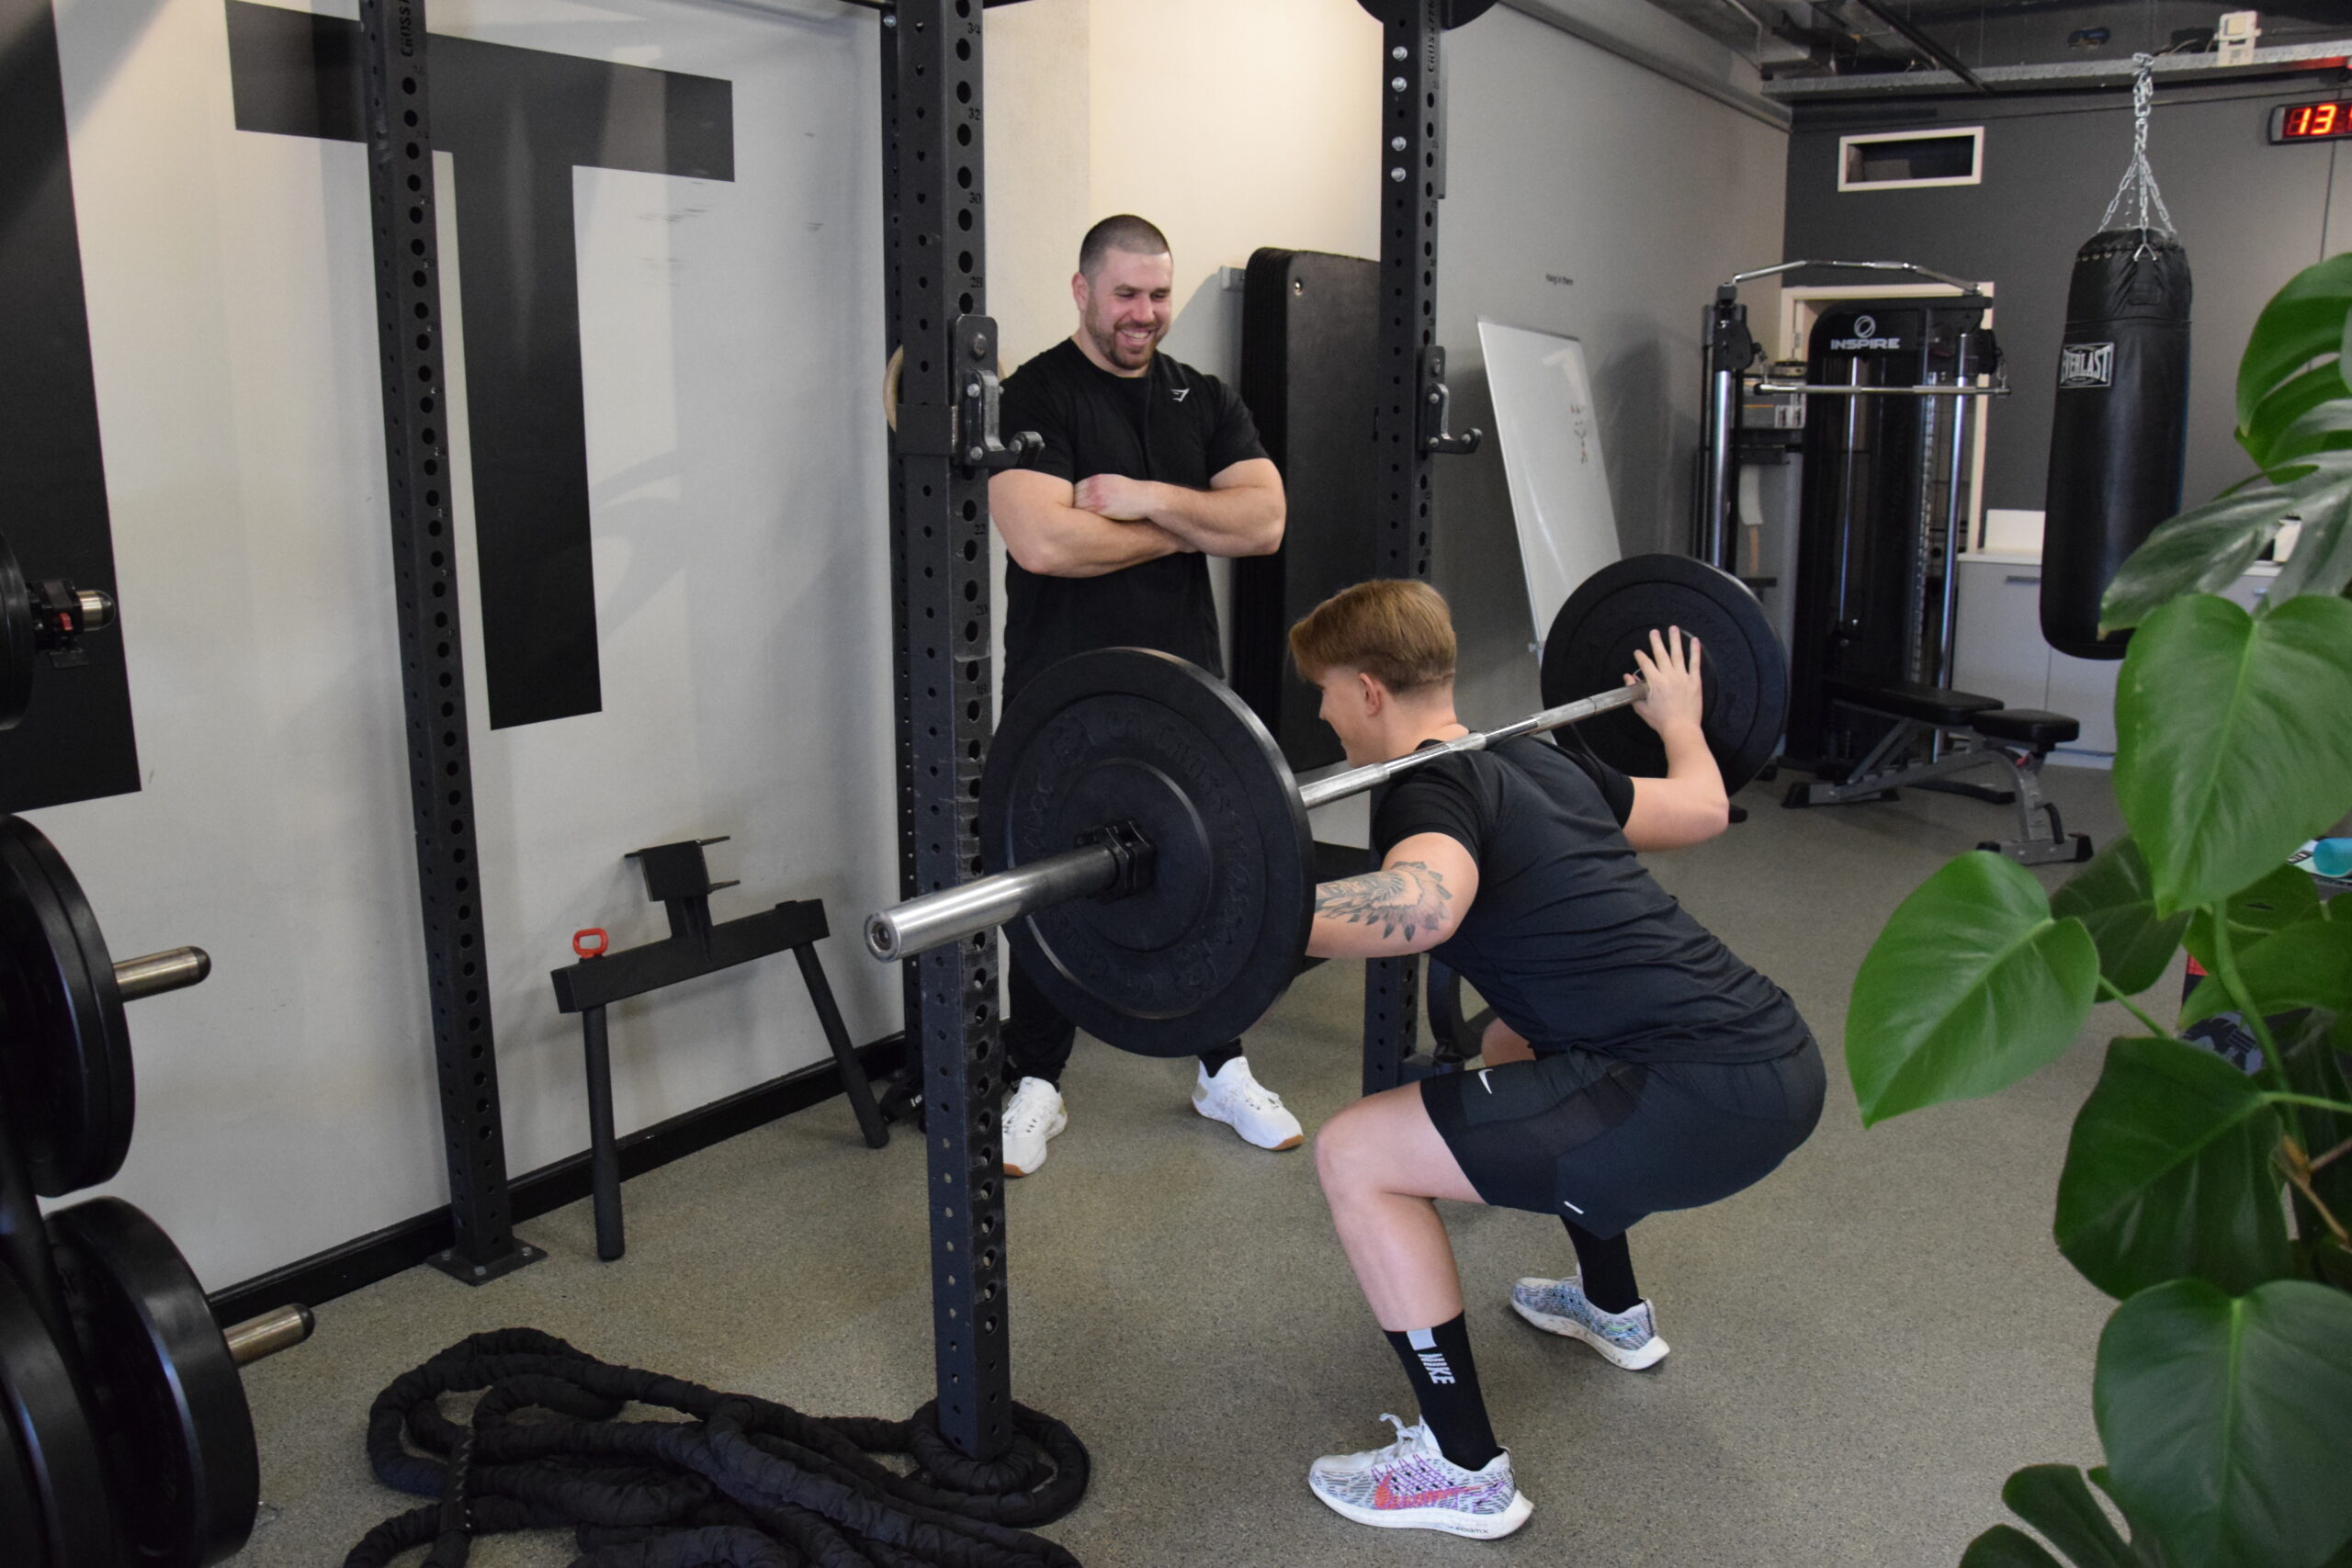 A coach/Personal trainer giving cues to a client while performing a squat.